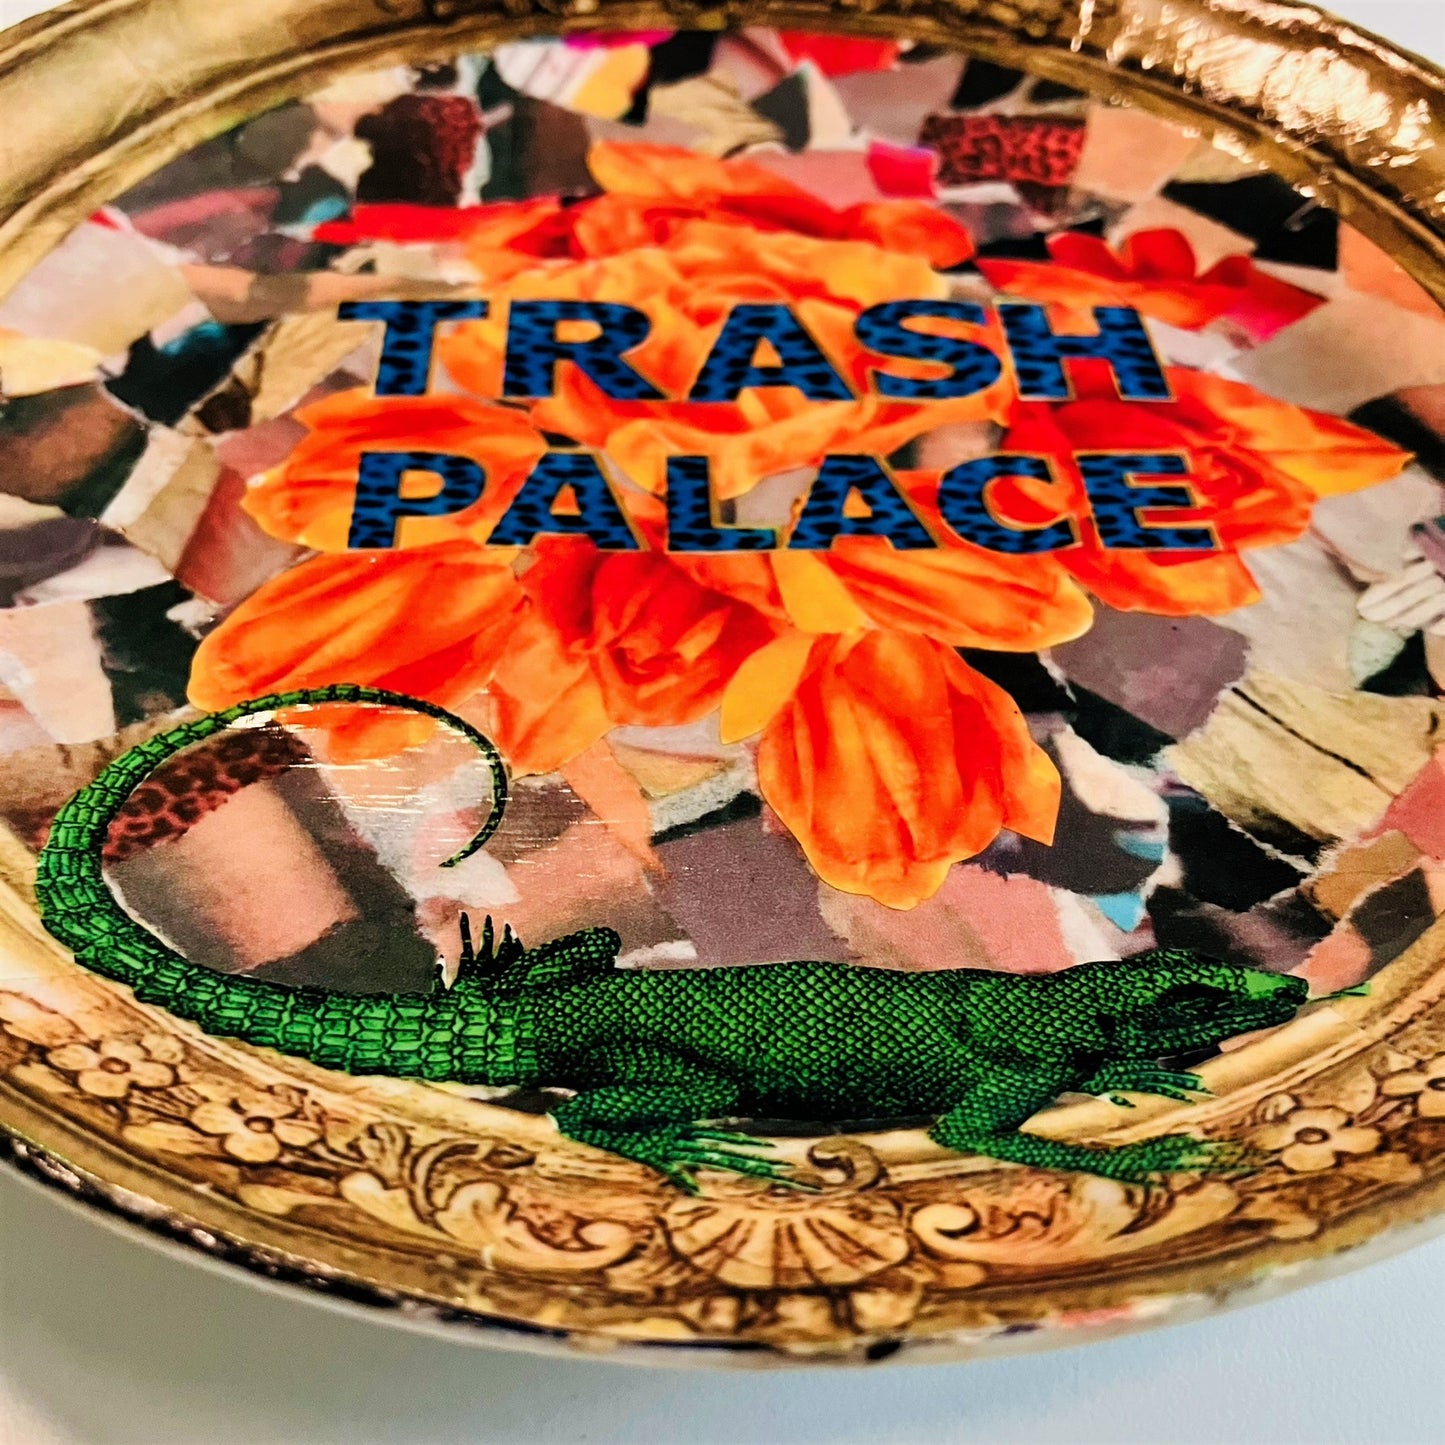 Neutral Upcycled Wall Plate - "Trash Palace" - by House of Frisson